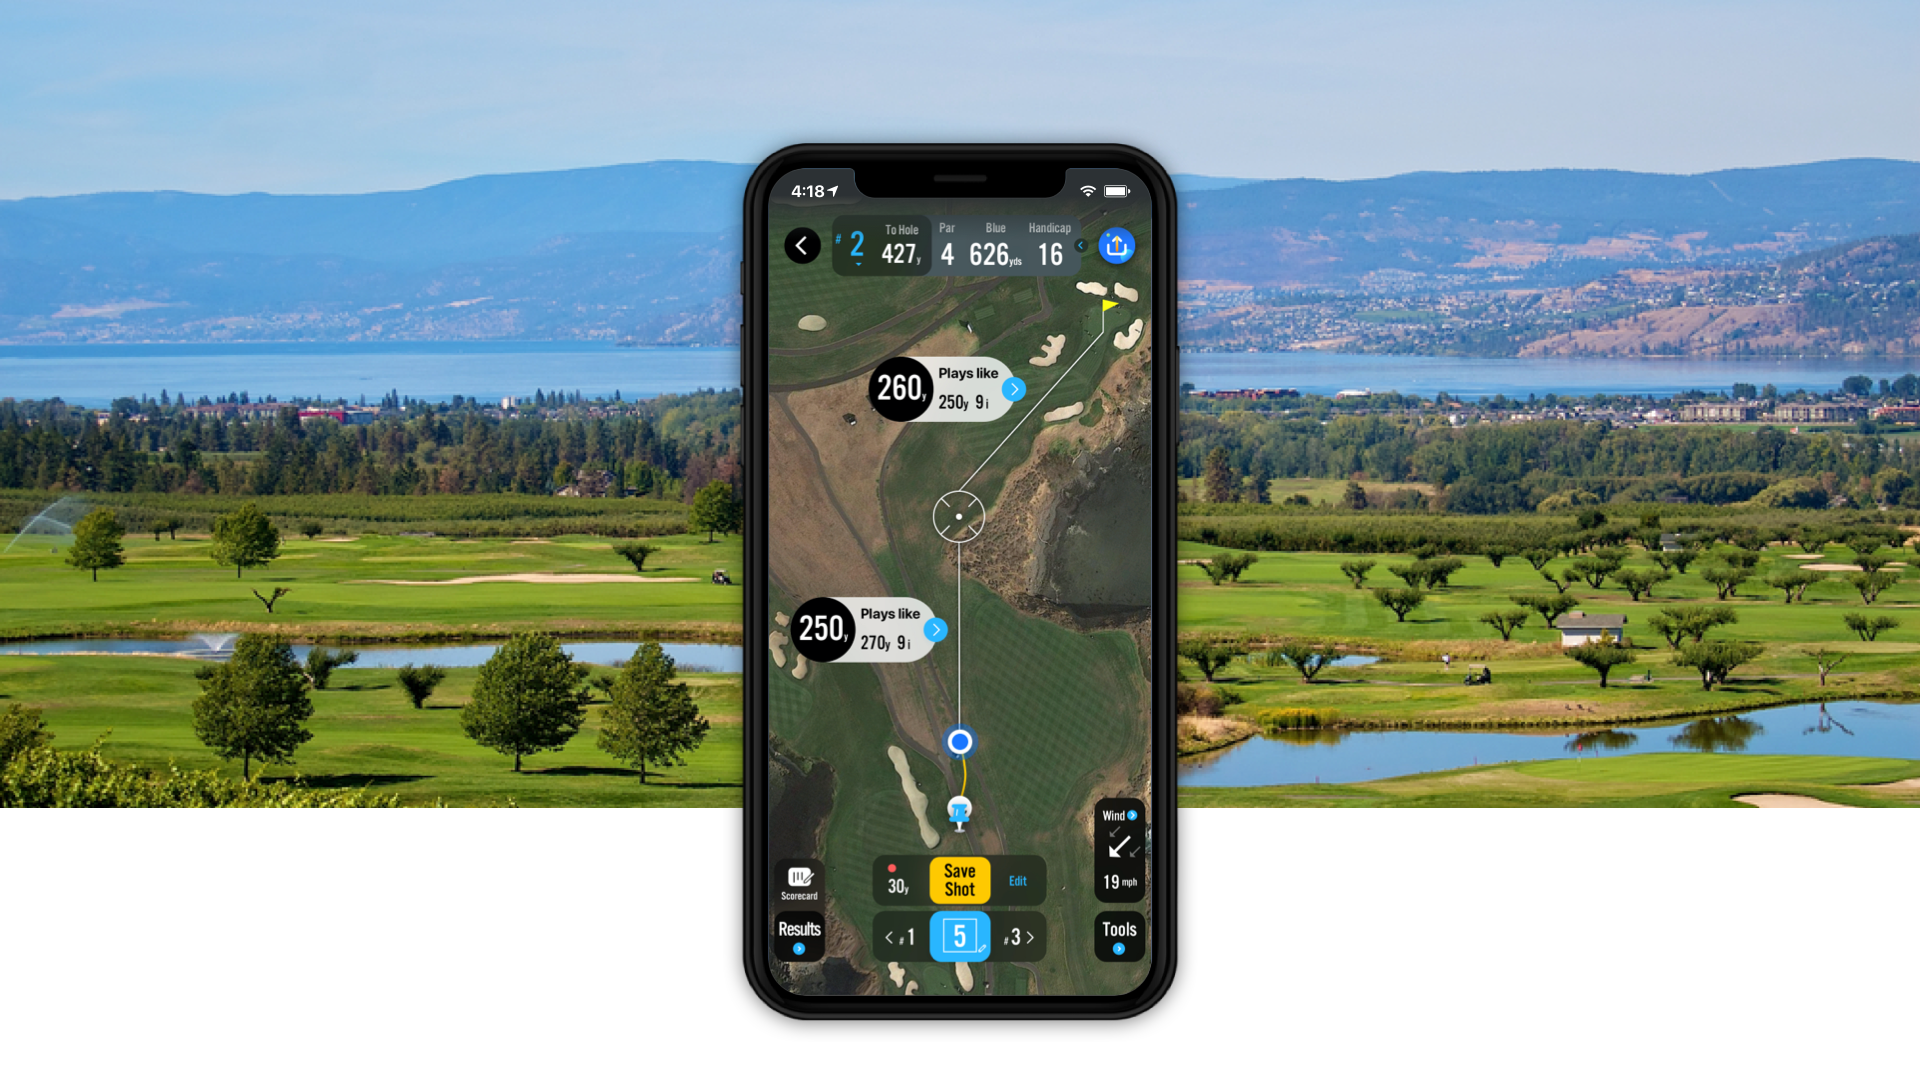 In our latest release, we've made a few updates to improve the overall experience,including your distance from the tee box and the GPS screen. We've also made it easier to track one shot to the next, and a way to make suqick edits to narrow in your shot distance accuracy.